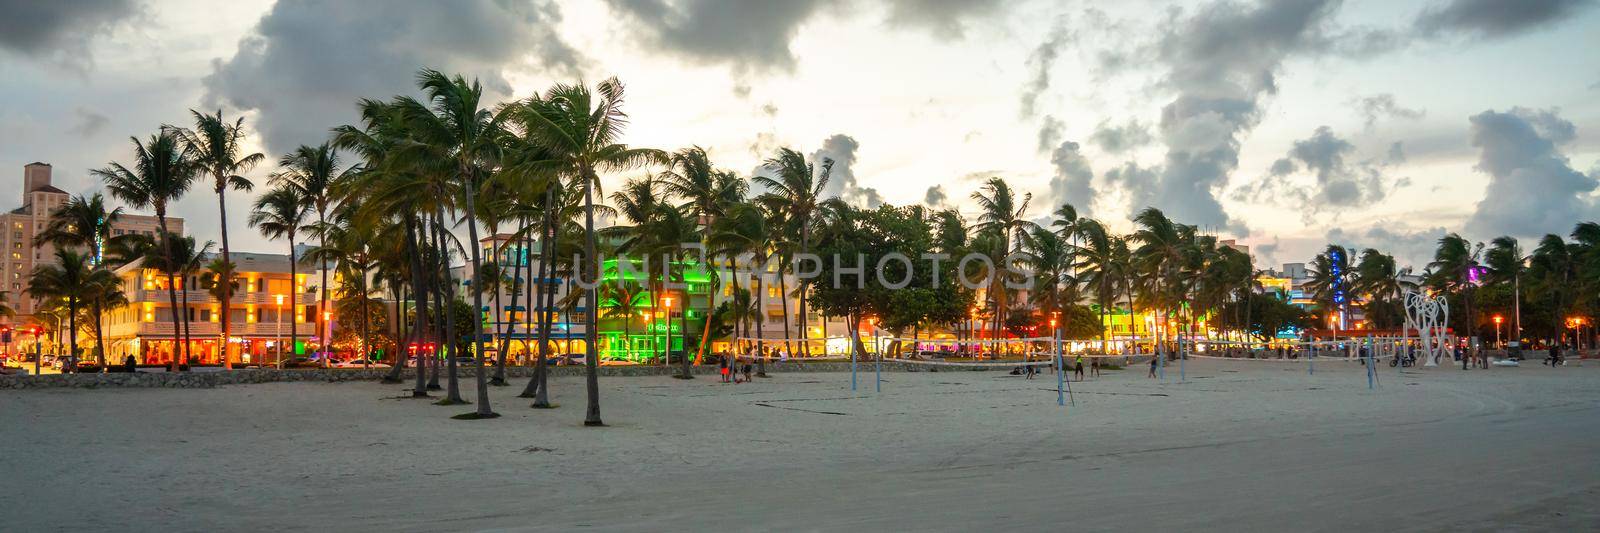 Miami Beach, USA - September 10, 2019: Ocean Drive hotels and restaurants at sunset. City skyline with palm trees at night. Art deco nightlife on the South beach